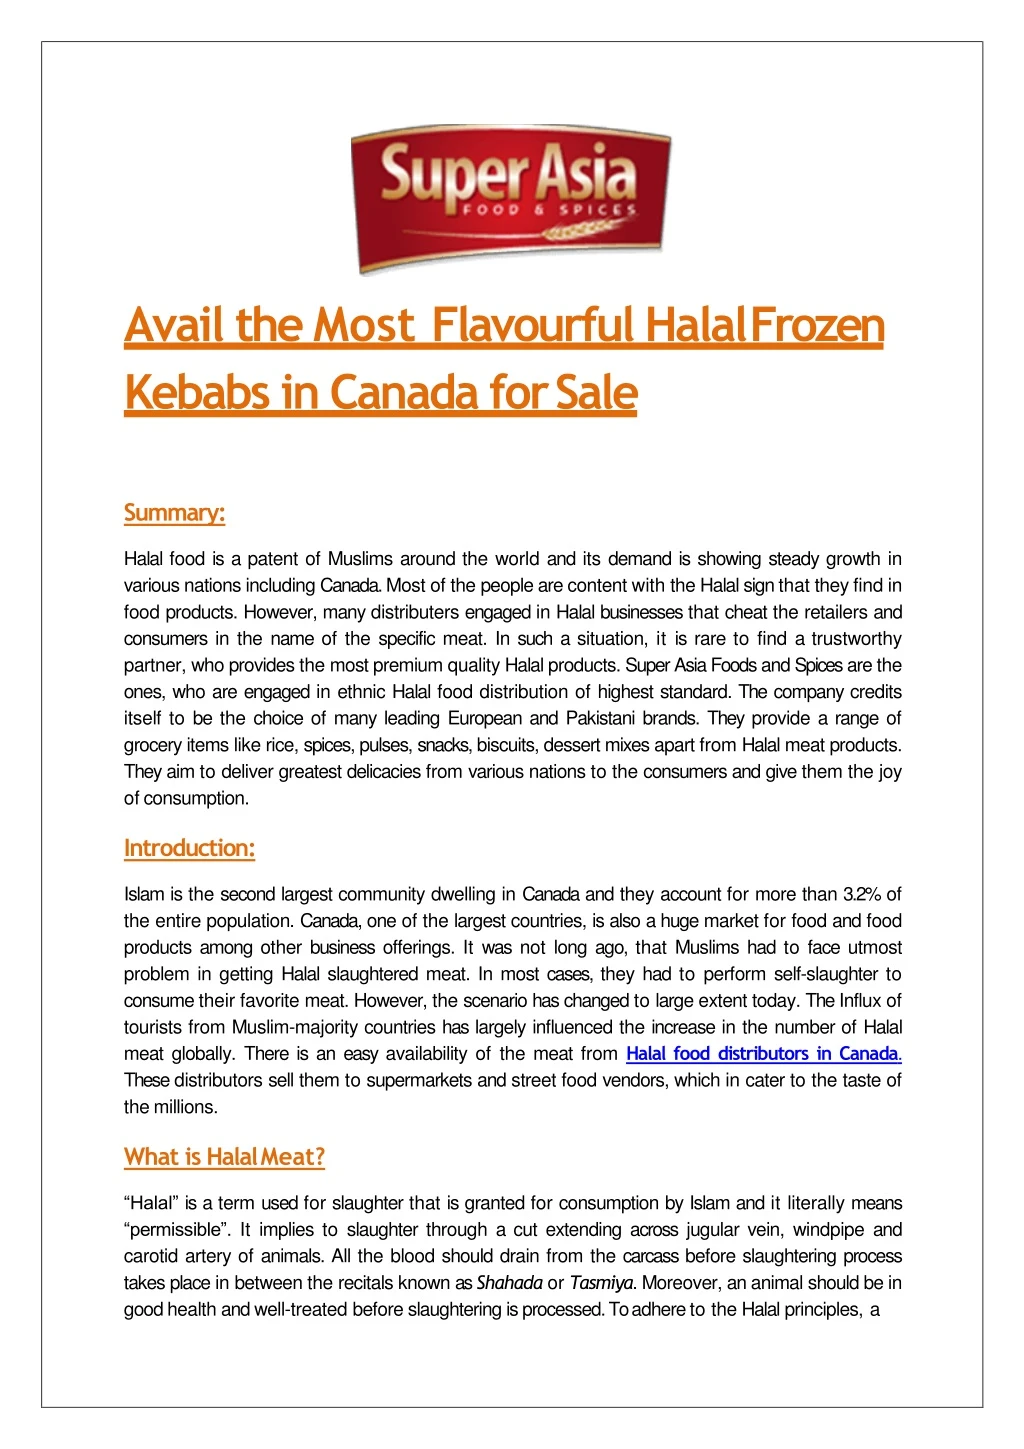 avail the most flavourful halal frozen kebabs in canada for sale